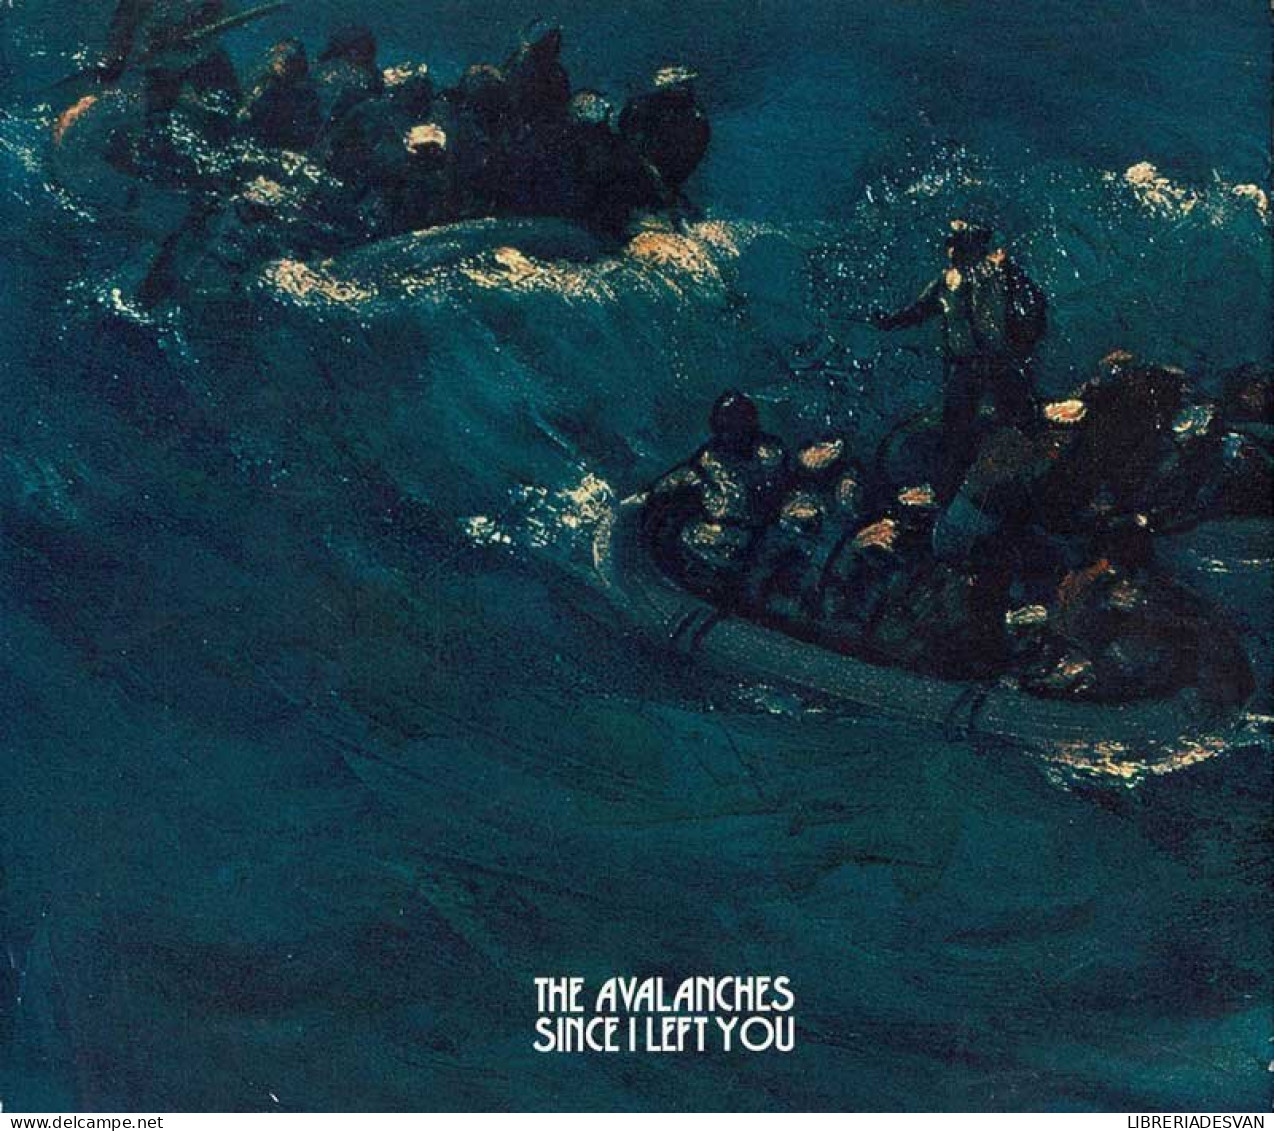 The Avalanches - Since I Left You. CD - Dance, Techno & House